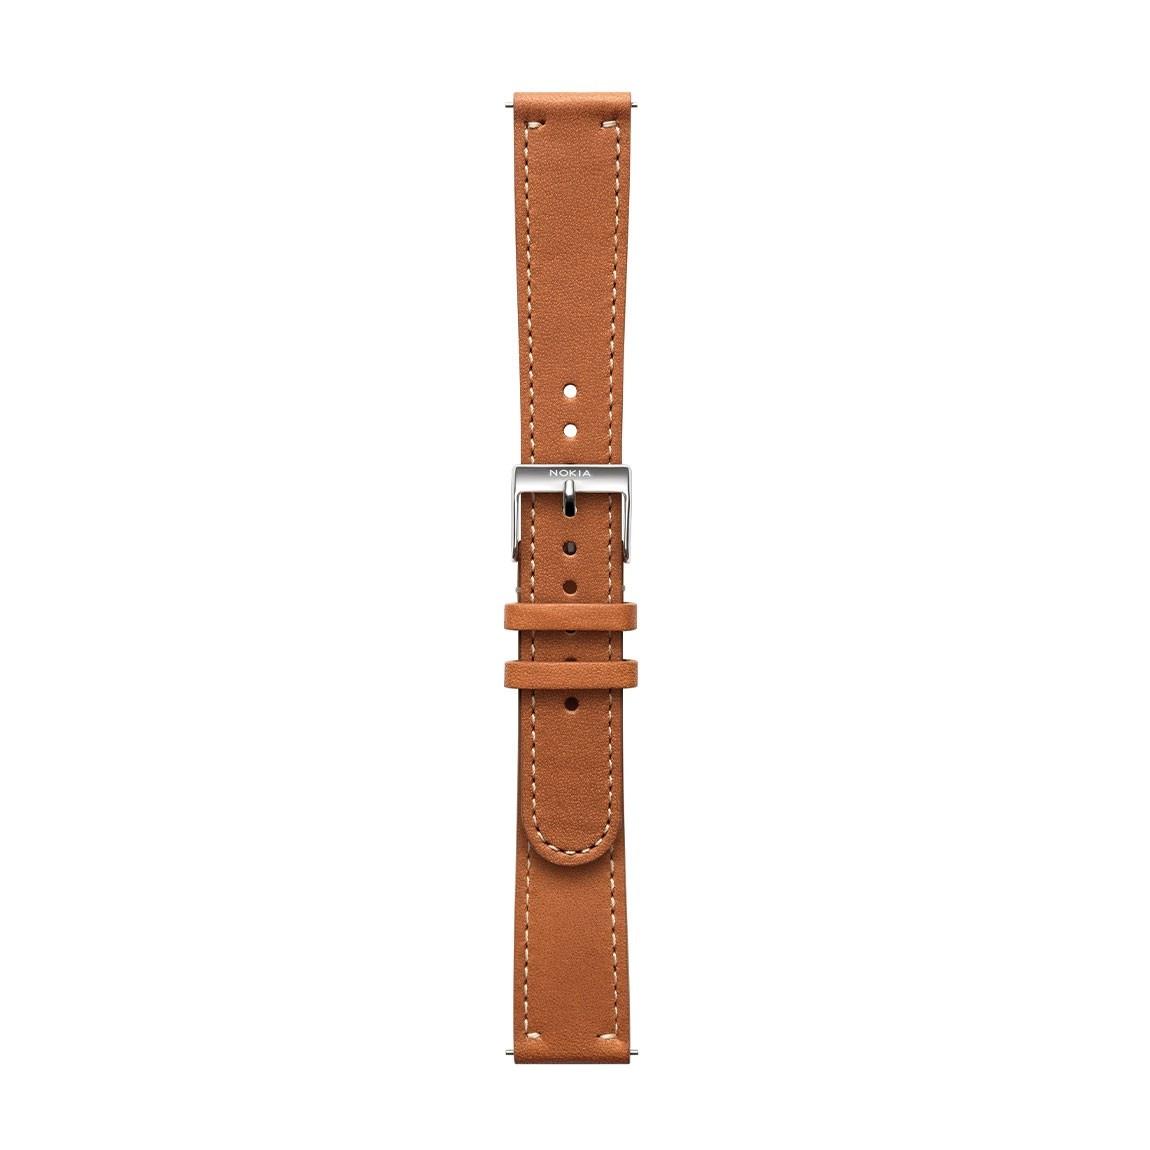 Withings/Nokia Activité Leder-Armband 18mm - Braun front